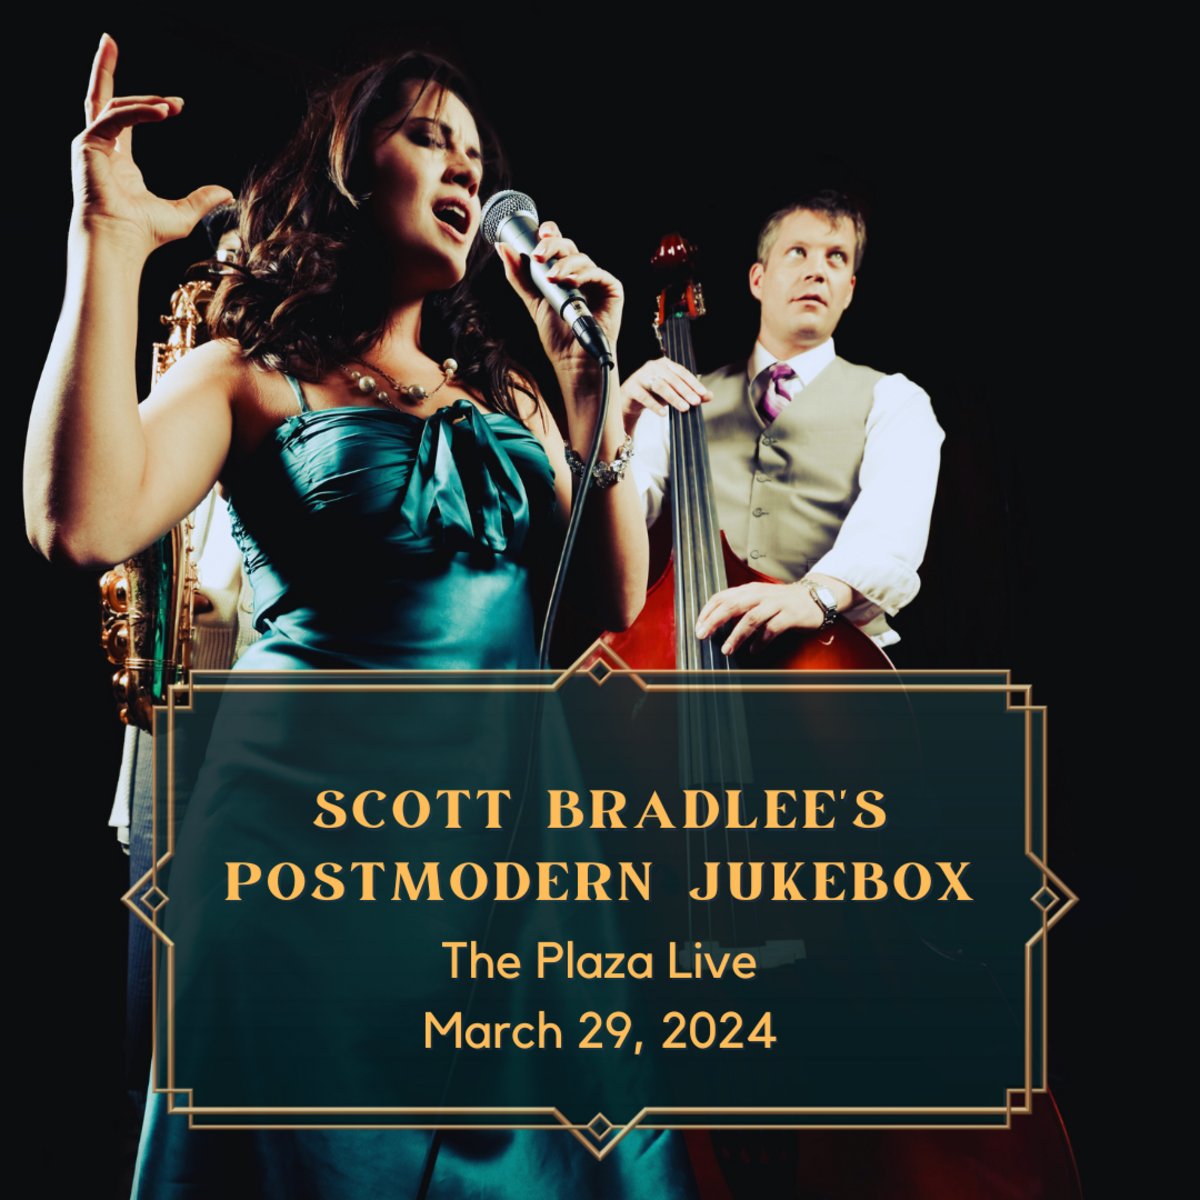 #PostmodernJukebox's Life In The Past Lane Concert Tour is a celebration of the greatest 20th century #musicalgenres, fused with the recognizable hits of our own modern era, for the perfect patina of 'vintage' and 'modern.' Get your tickets here: bit.ly/3P2AERC